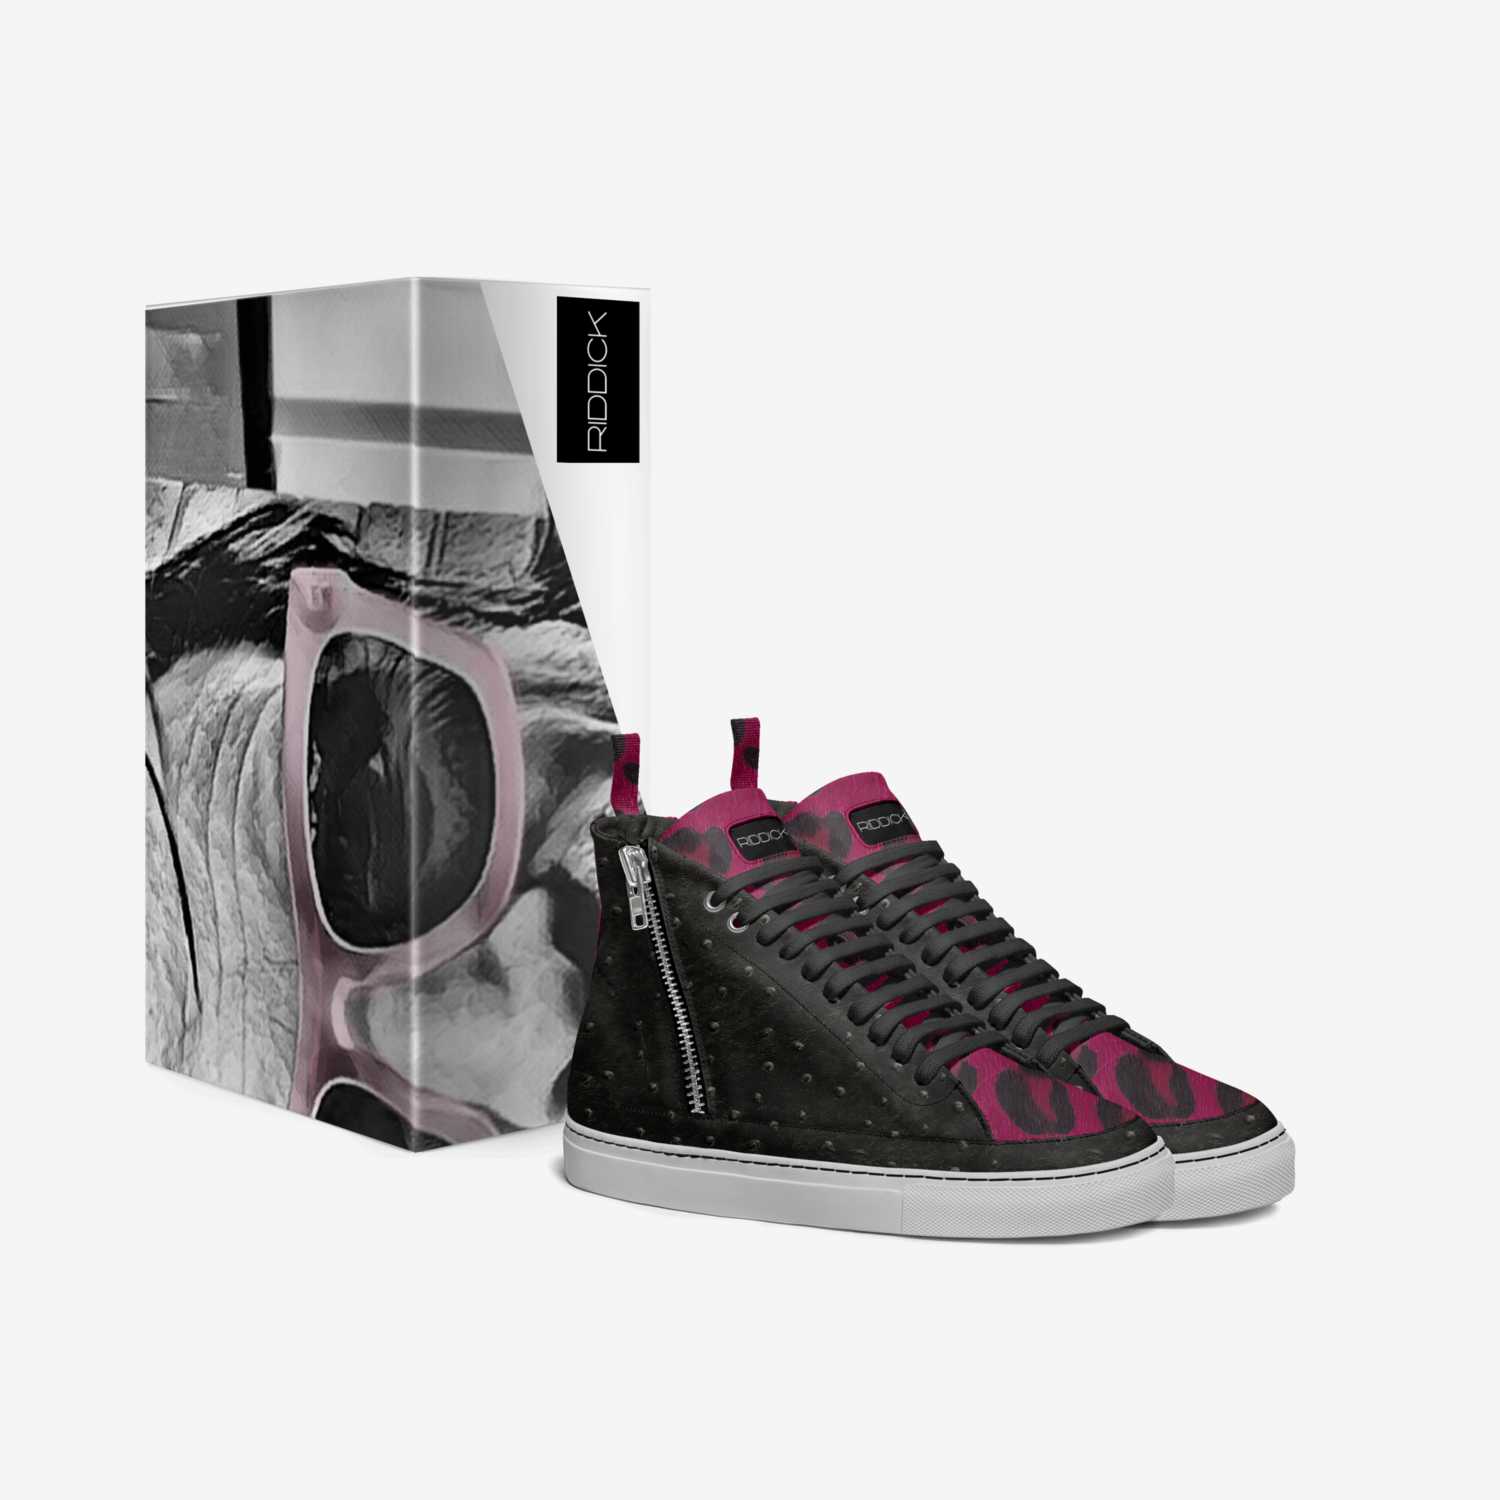 Fuscia Jungle custom made in Italy shoes by Haden Riddick | Box view